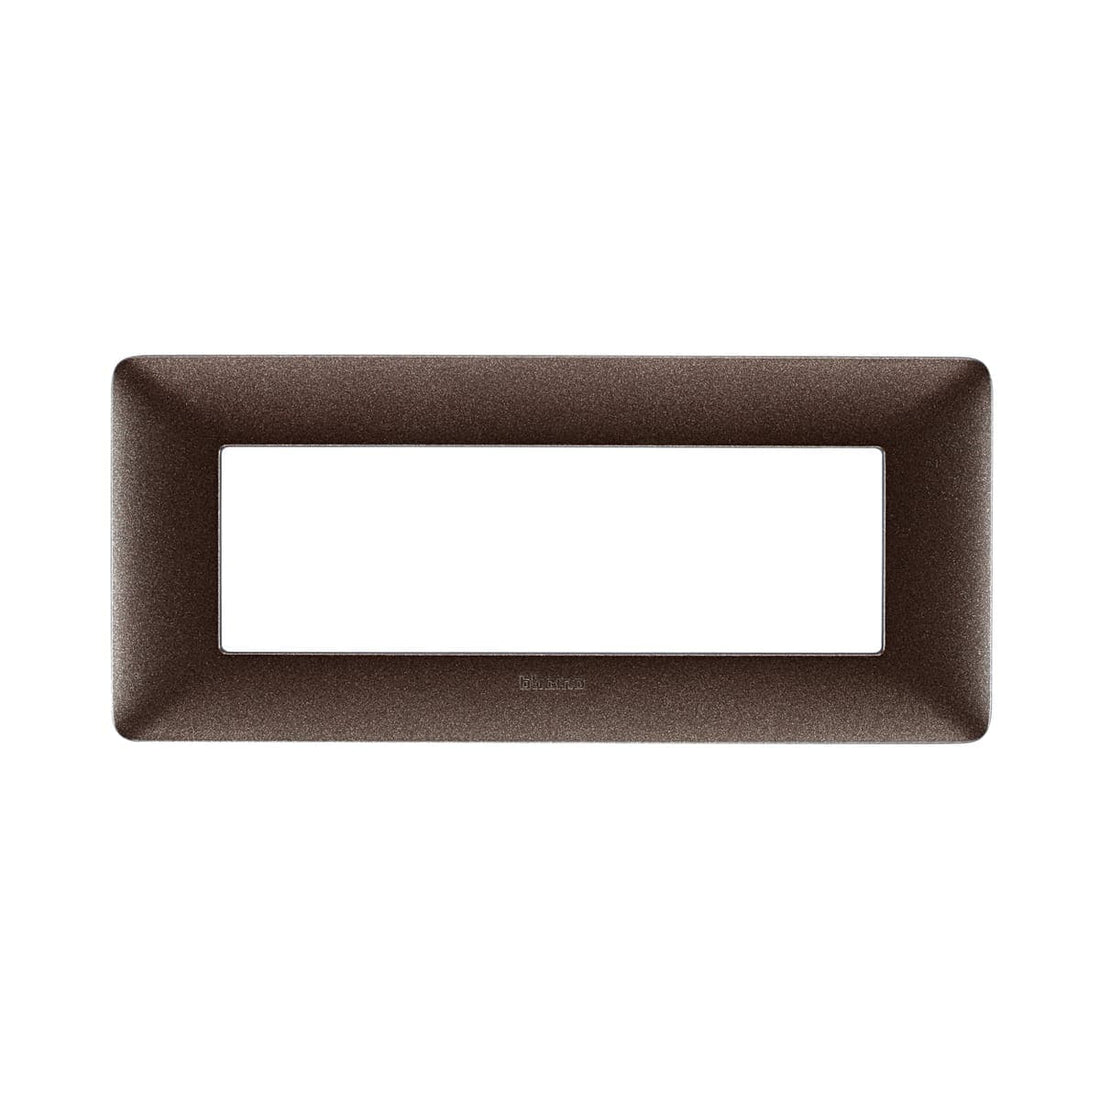 MATIX PLATE 6 PLACES COFFEE BROWN - best price from Maltashopper.com BR420100853